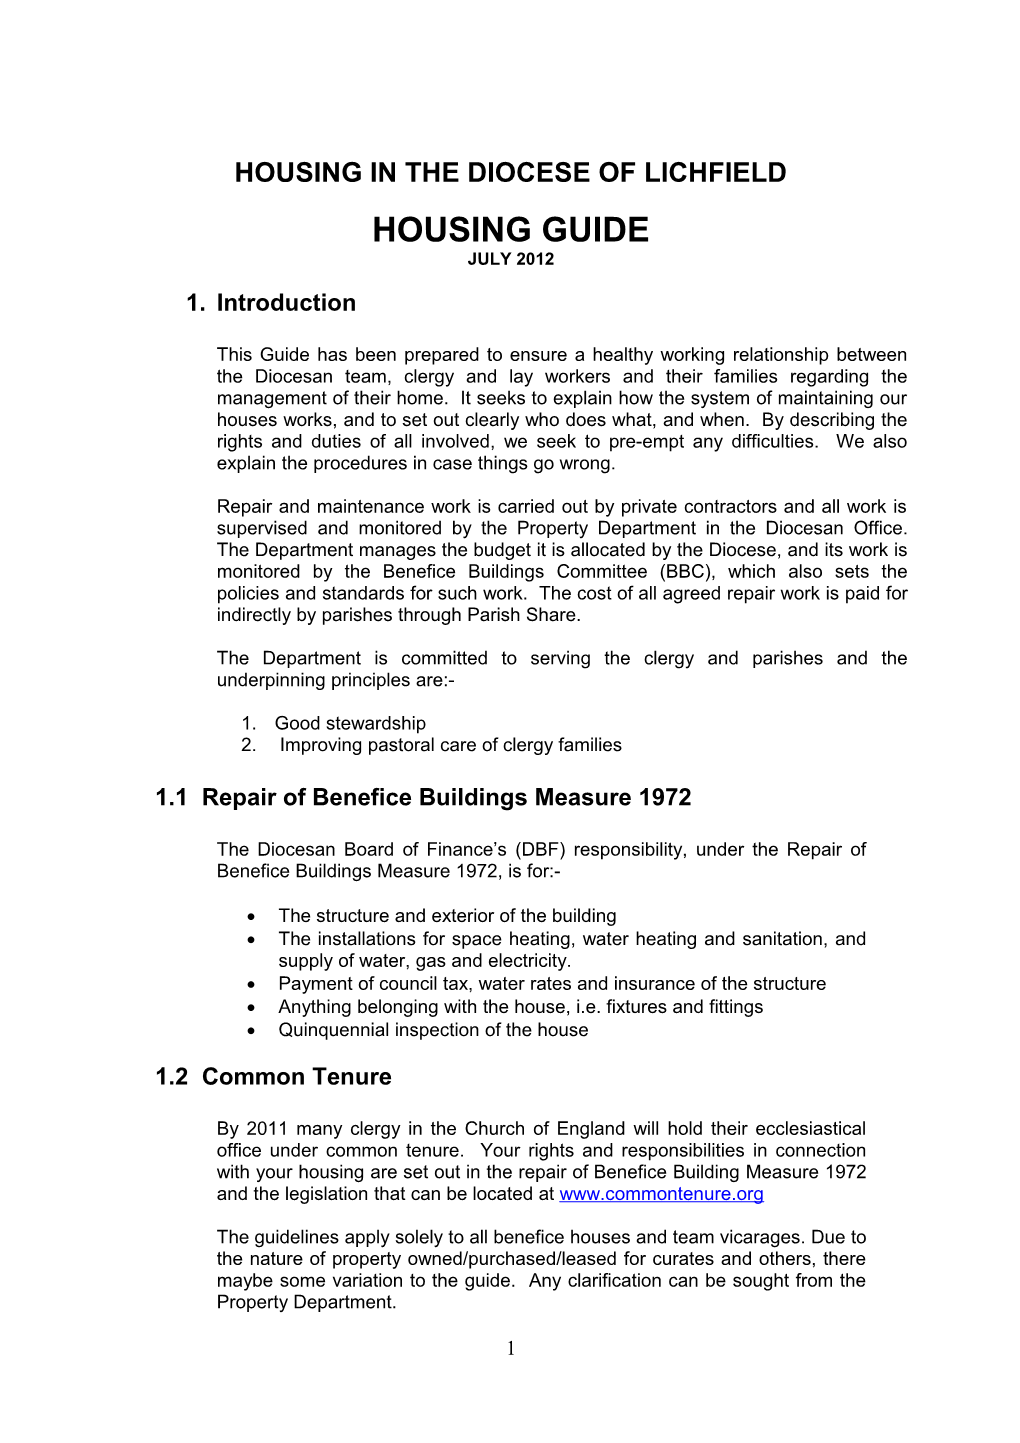 Housing in the Diocese of Chelmsford